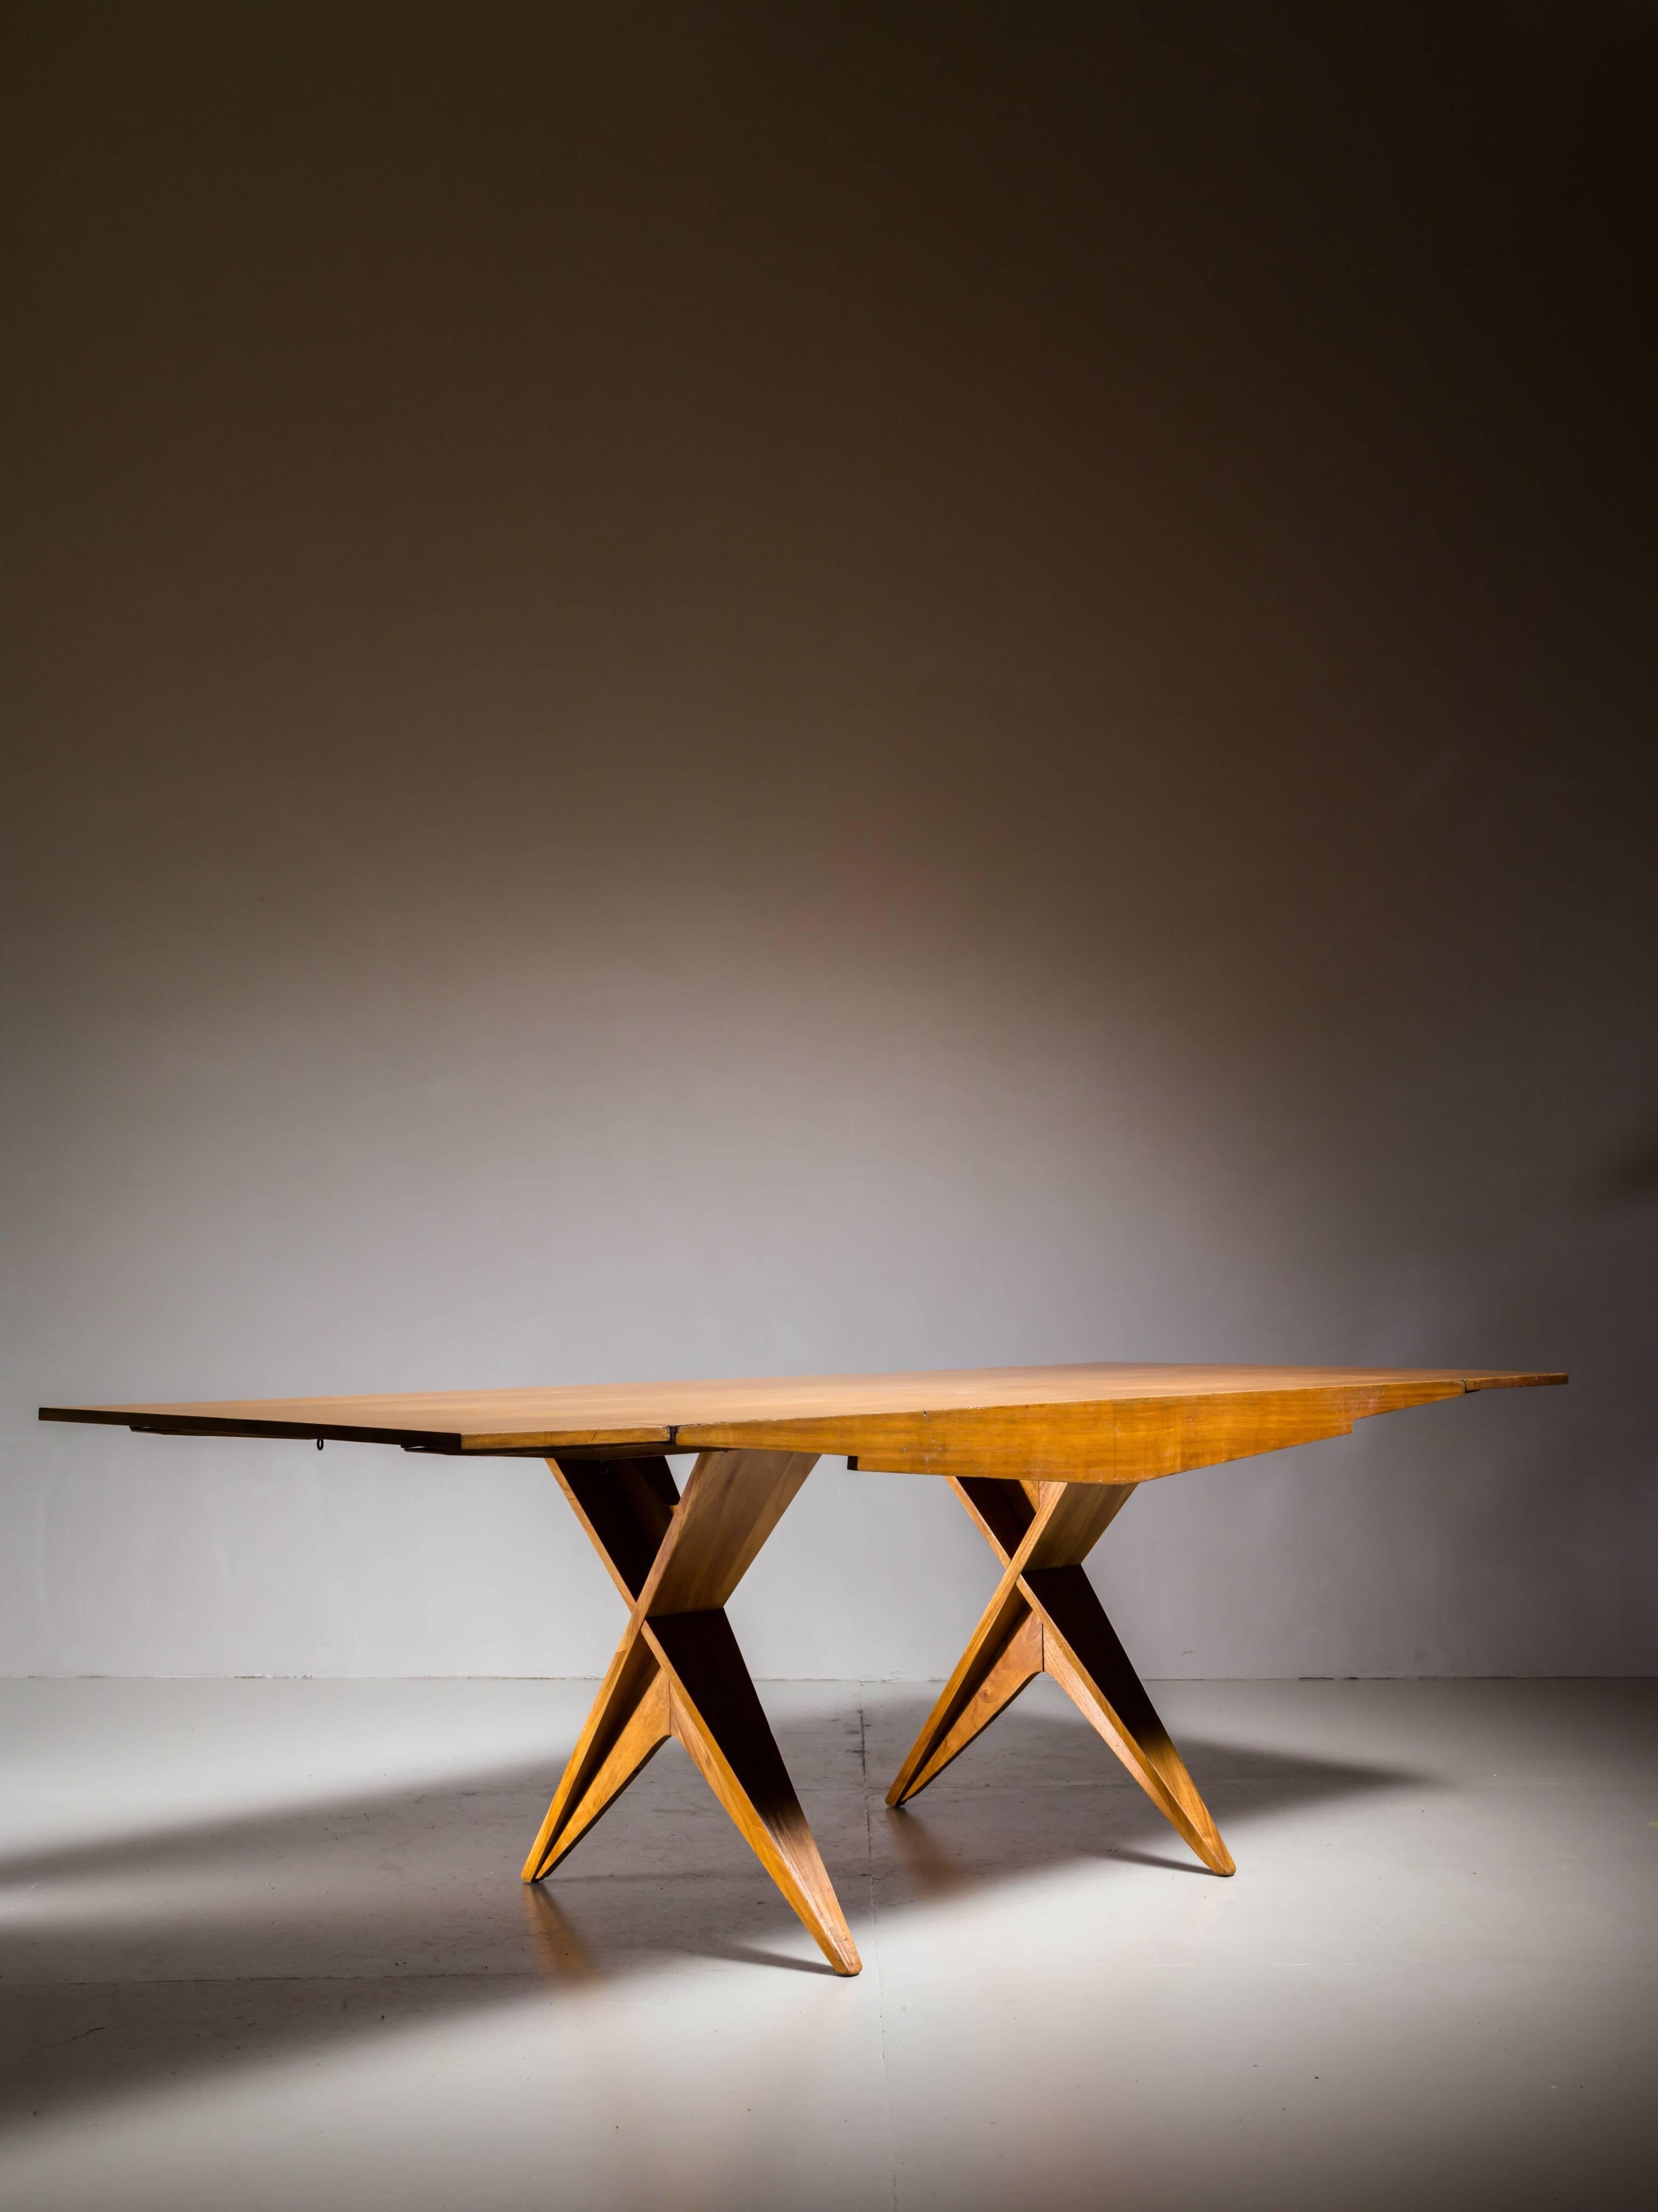 A blonde mahogany fold-out table on architectural X-base legs by Californian designer Dan Johnson. The extensions fold down and inwards and in both positions the dimensions and Silhouette of the table are in a perfect balance.

When unfolded the